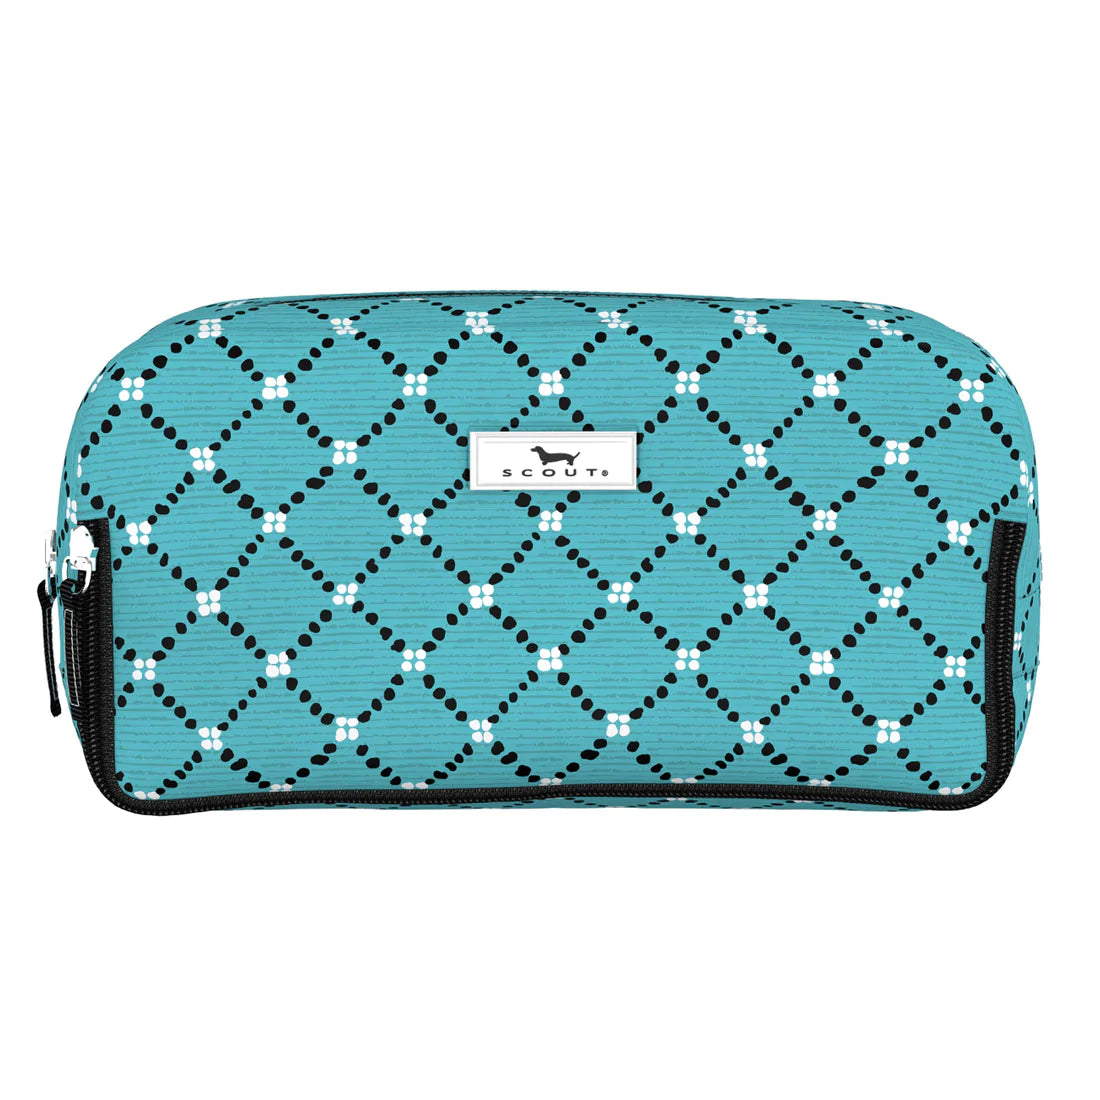 Scout 3-Way Toiletry Bag - Stitch Please